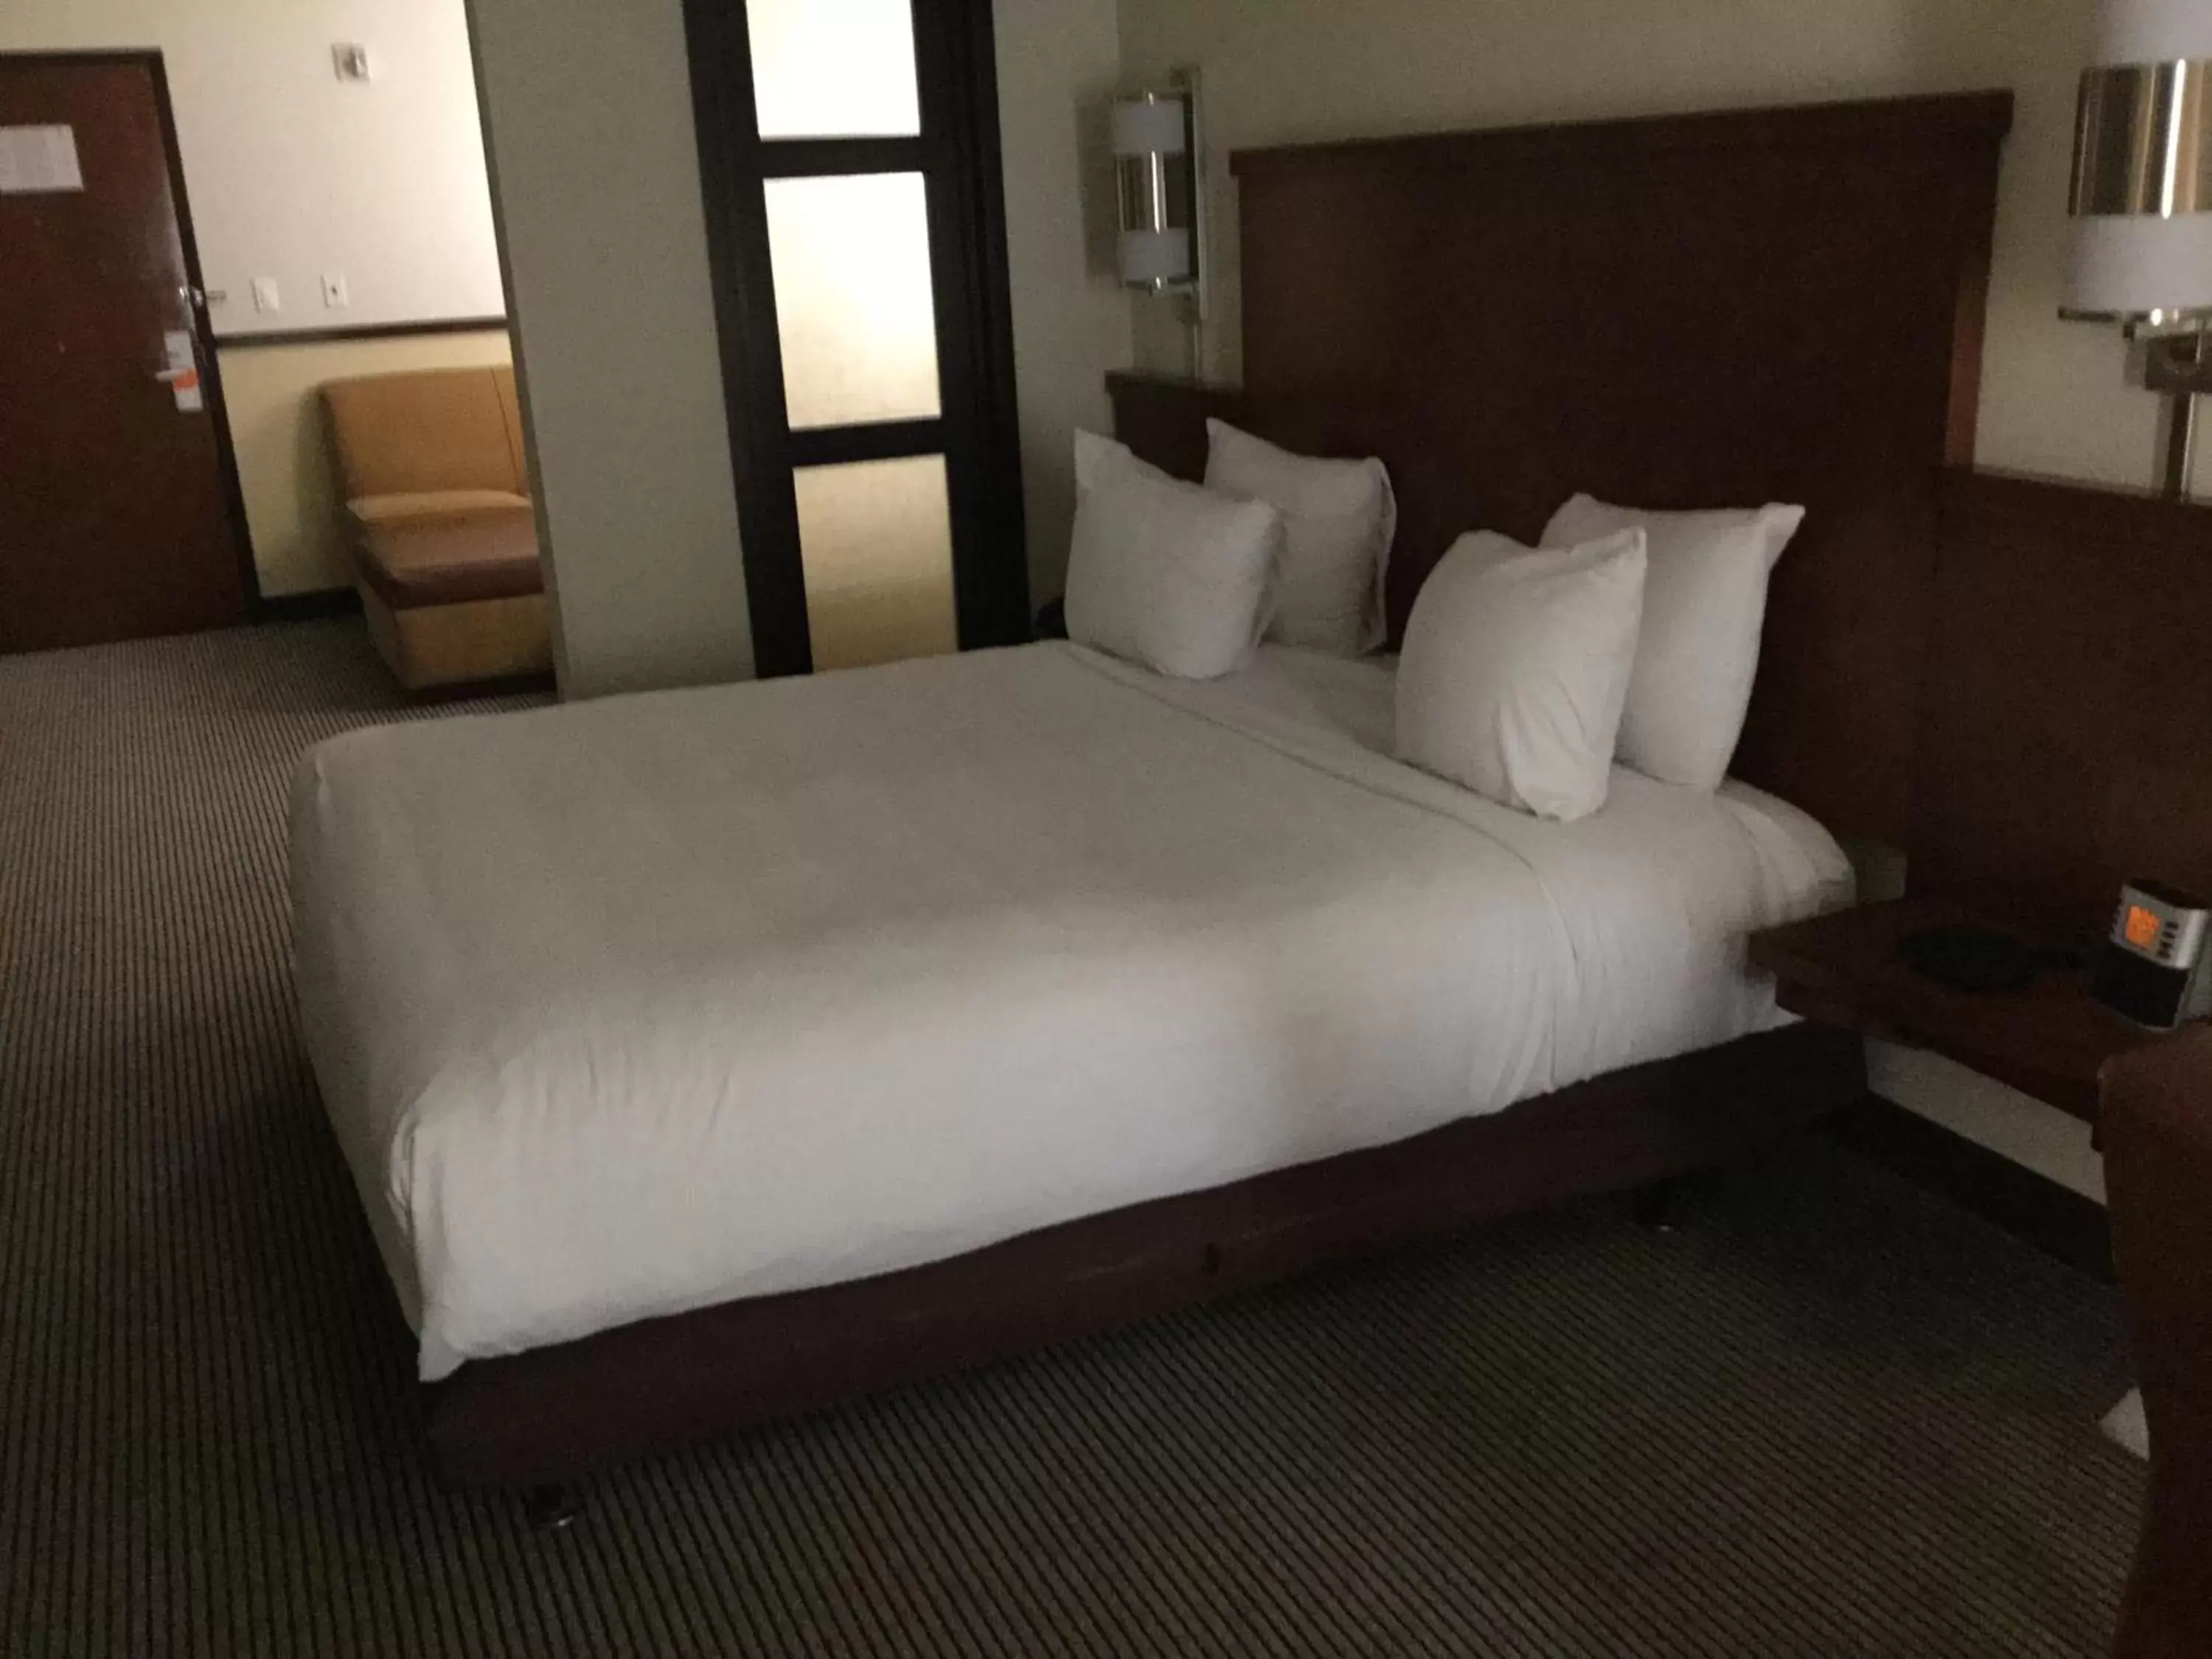 King Room with Sofa Bed in Hyatt Place Nashville Airport